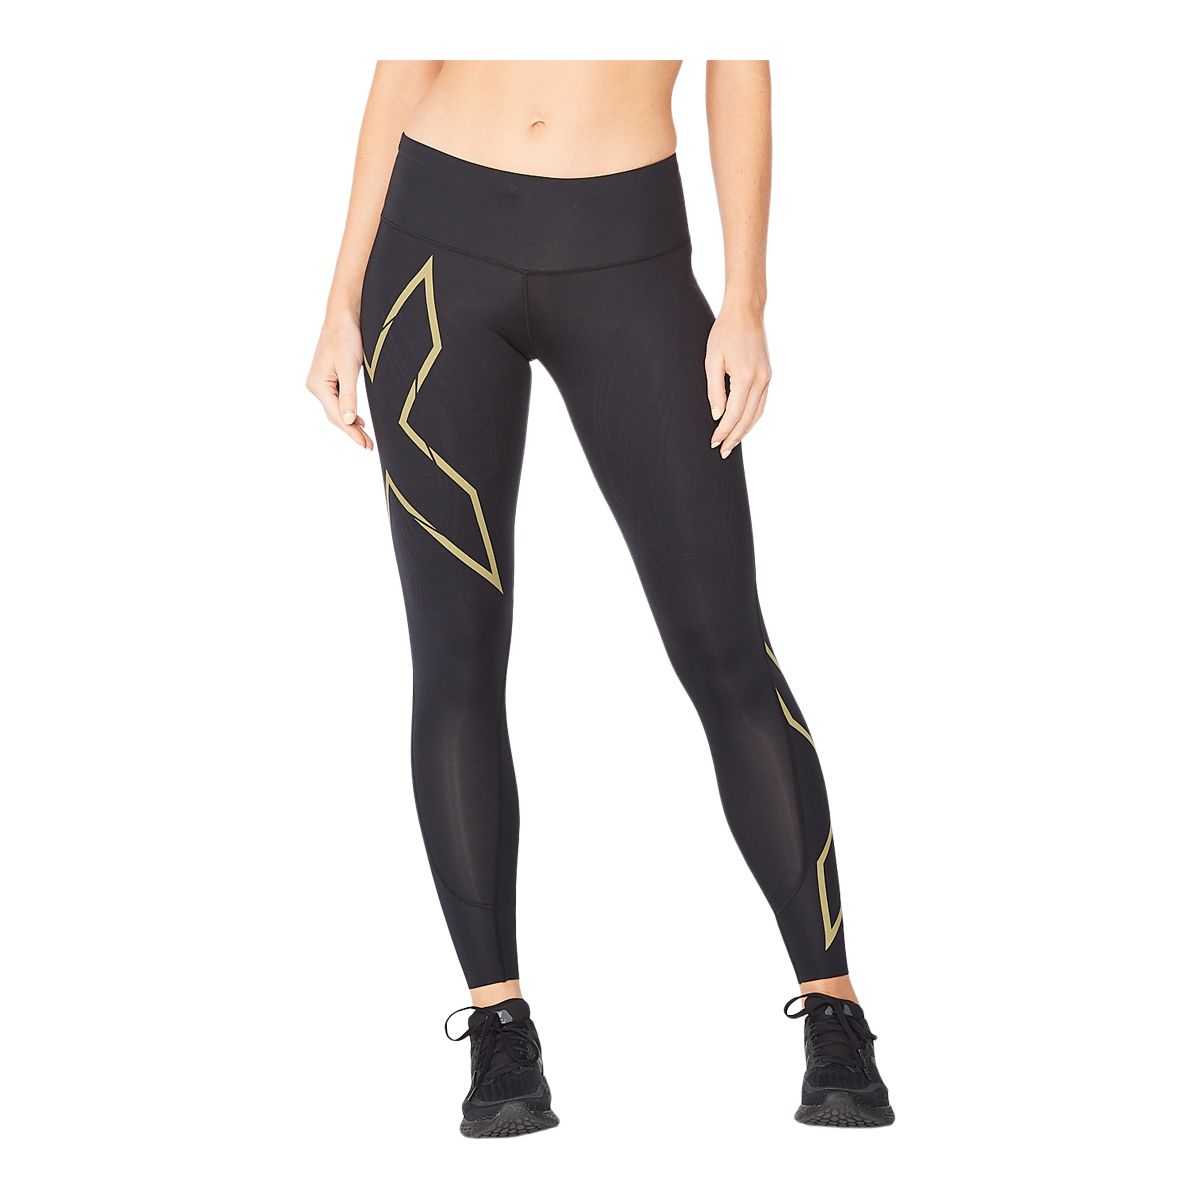 Image of 2XU Women's Lightspeed Midrise Compression Tights